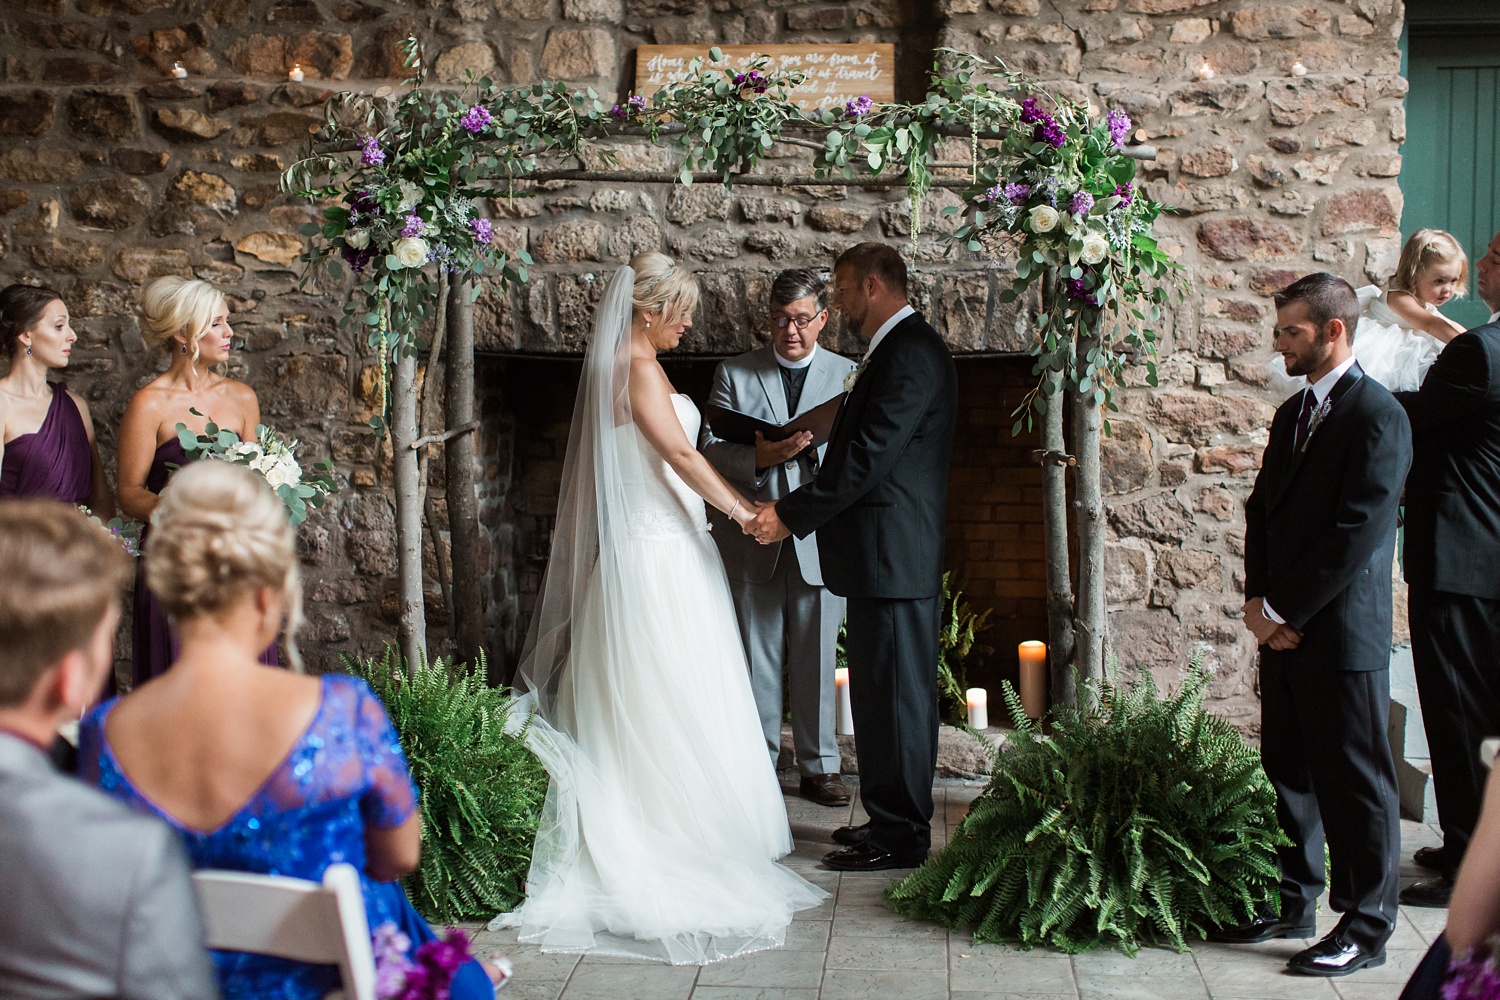 Holly Hedge Wedding Photography | Purple and Cream Wedding Inspiration | Br ittany and Chris